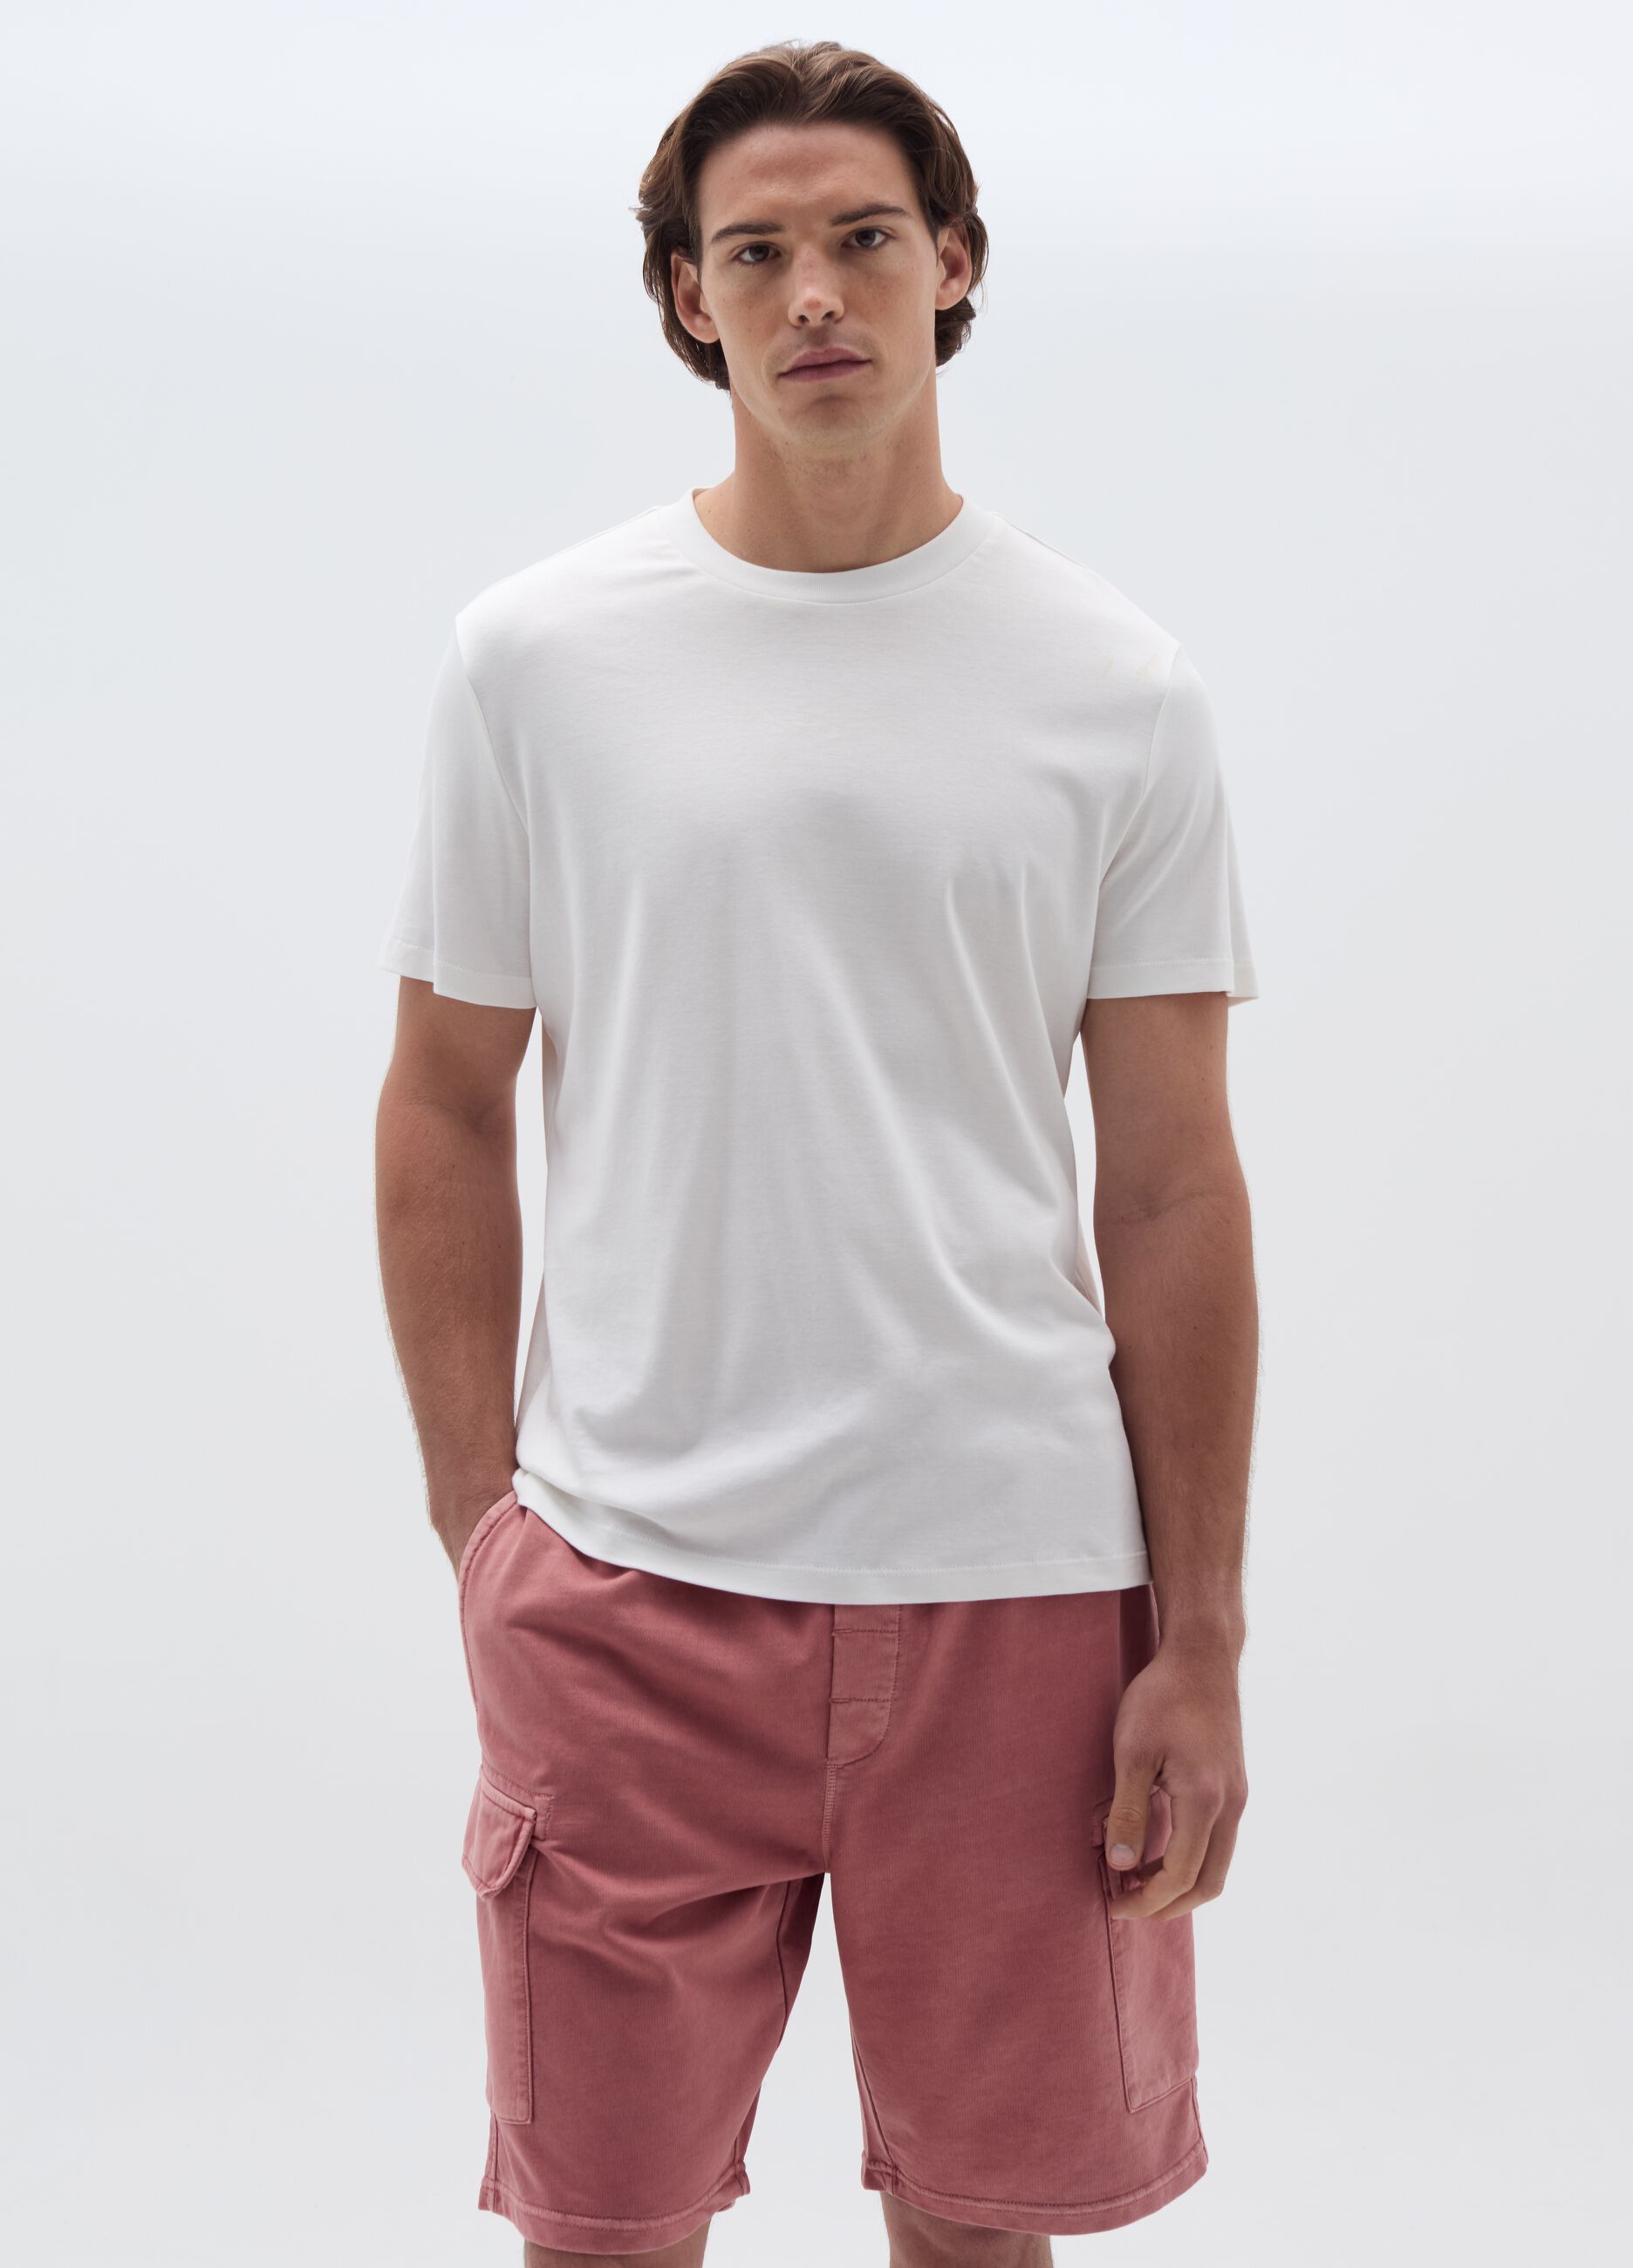 Cargo Bermuda shorts in cotton with drawstring